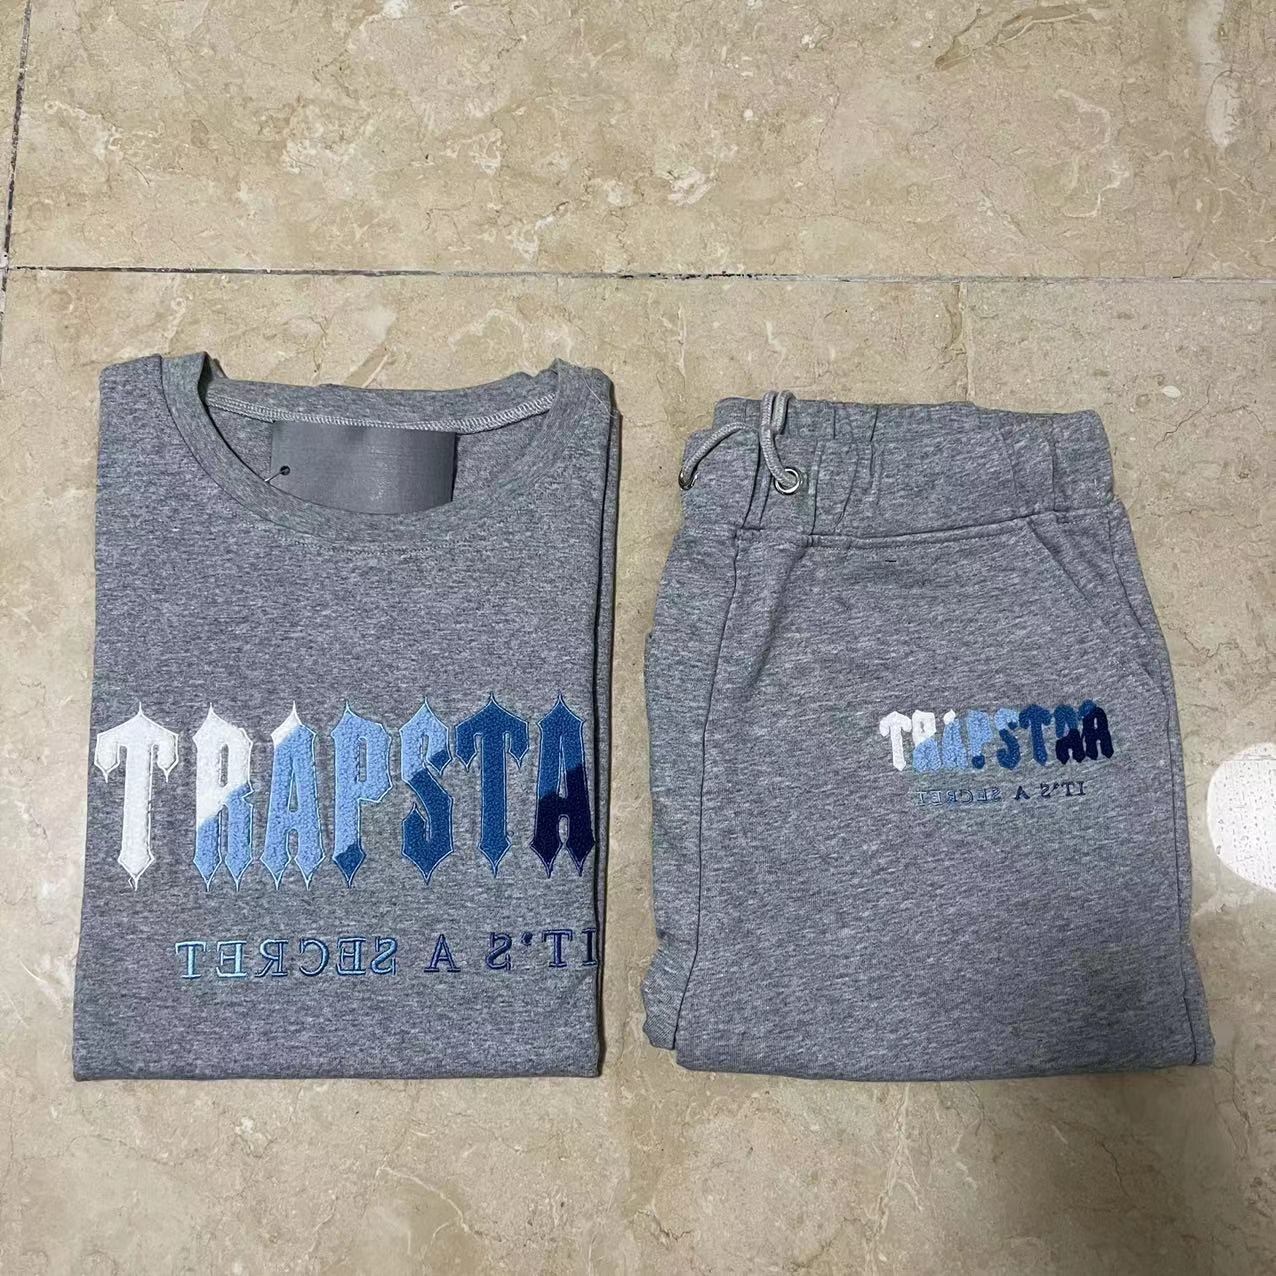 TRAPSTAR TEE T SHIRT LETTER EMBROIDERY (GRAY WHITE BLUE)